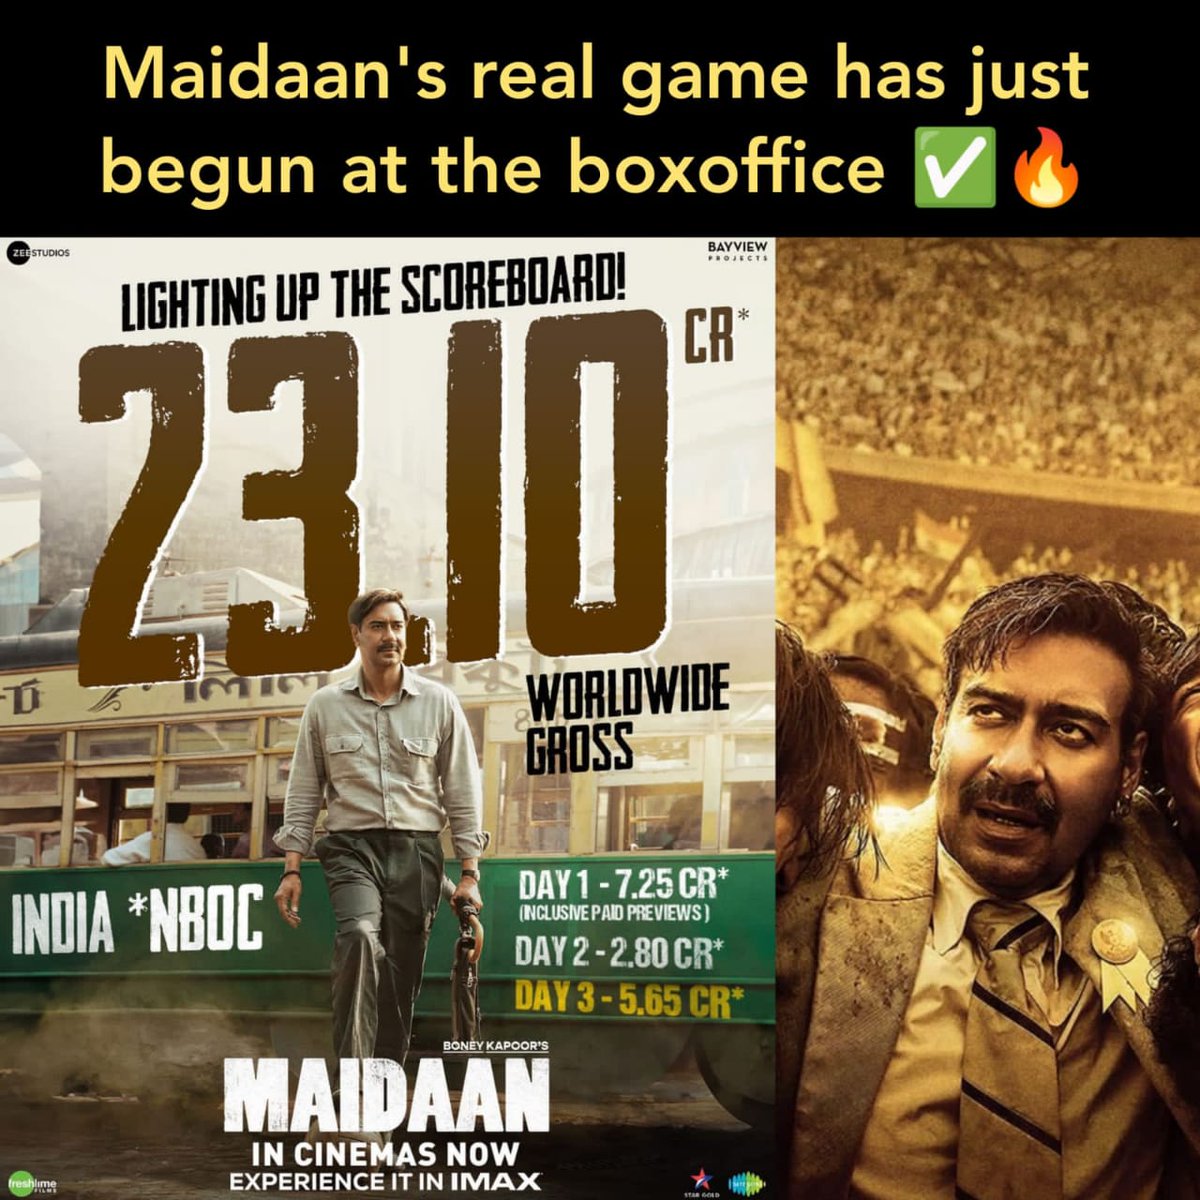 With each passing day, #Maidaan's box office numbers soar higher, proving that its impact is more than just a flash in the pan.